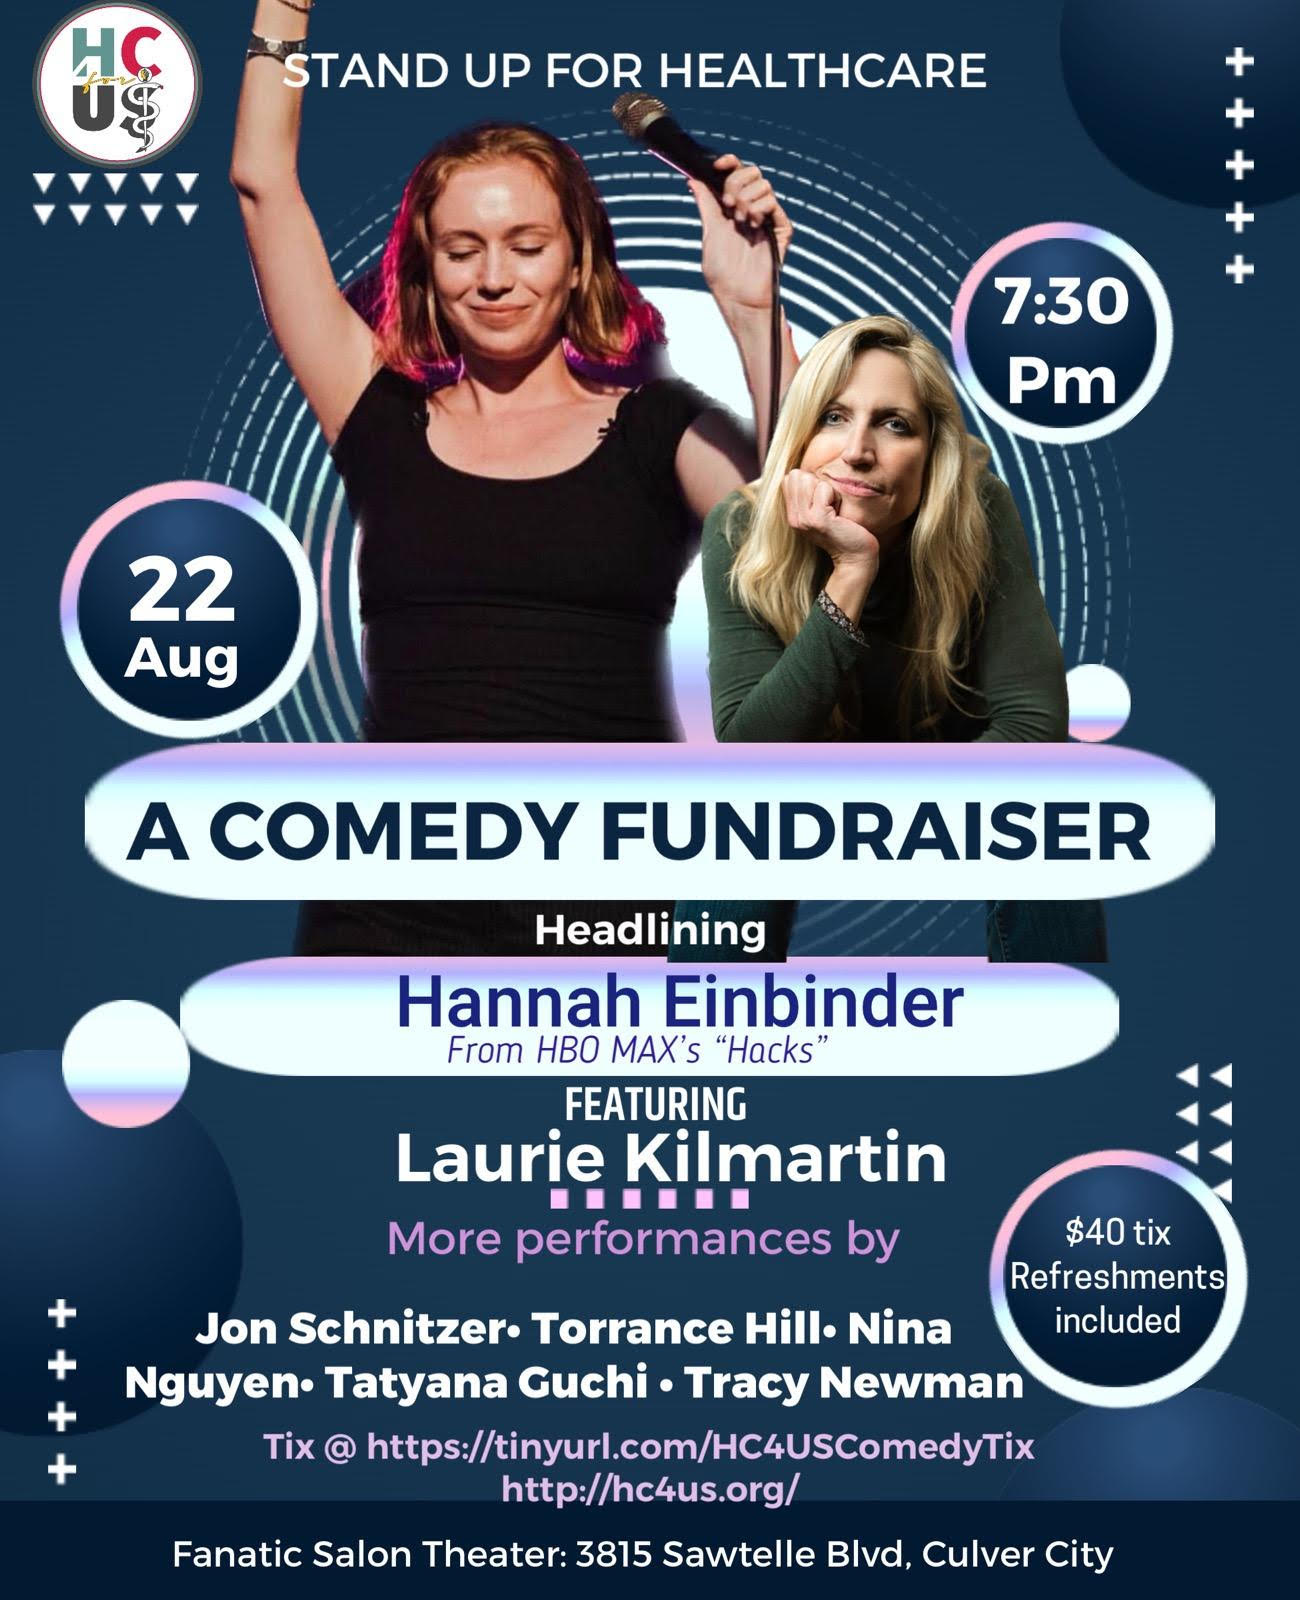 stand up for healthcare, fundraiser, comedy, fanatic salon, culver city, Hannah Einbinder